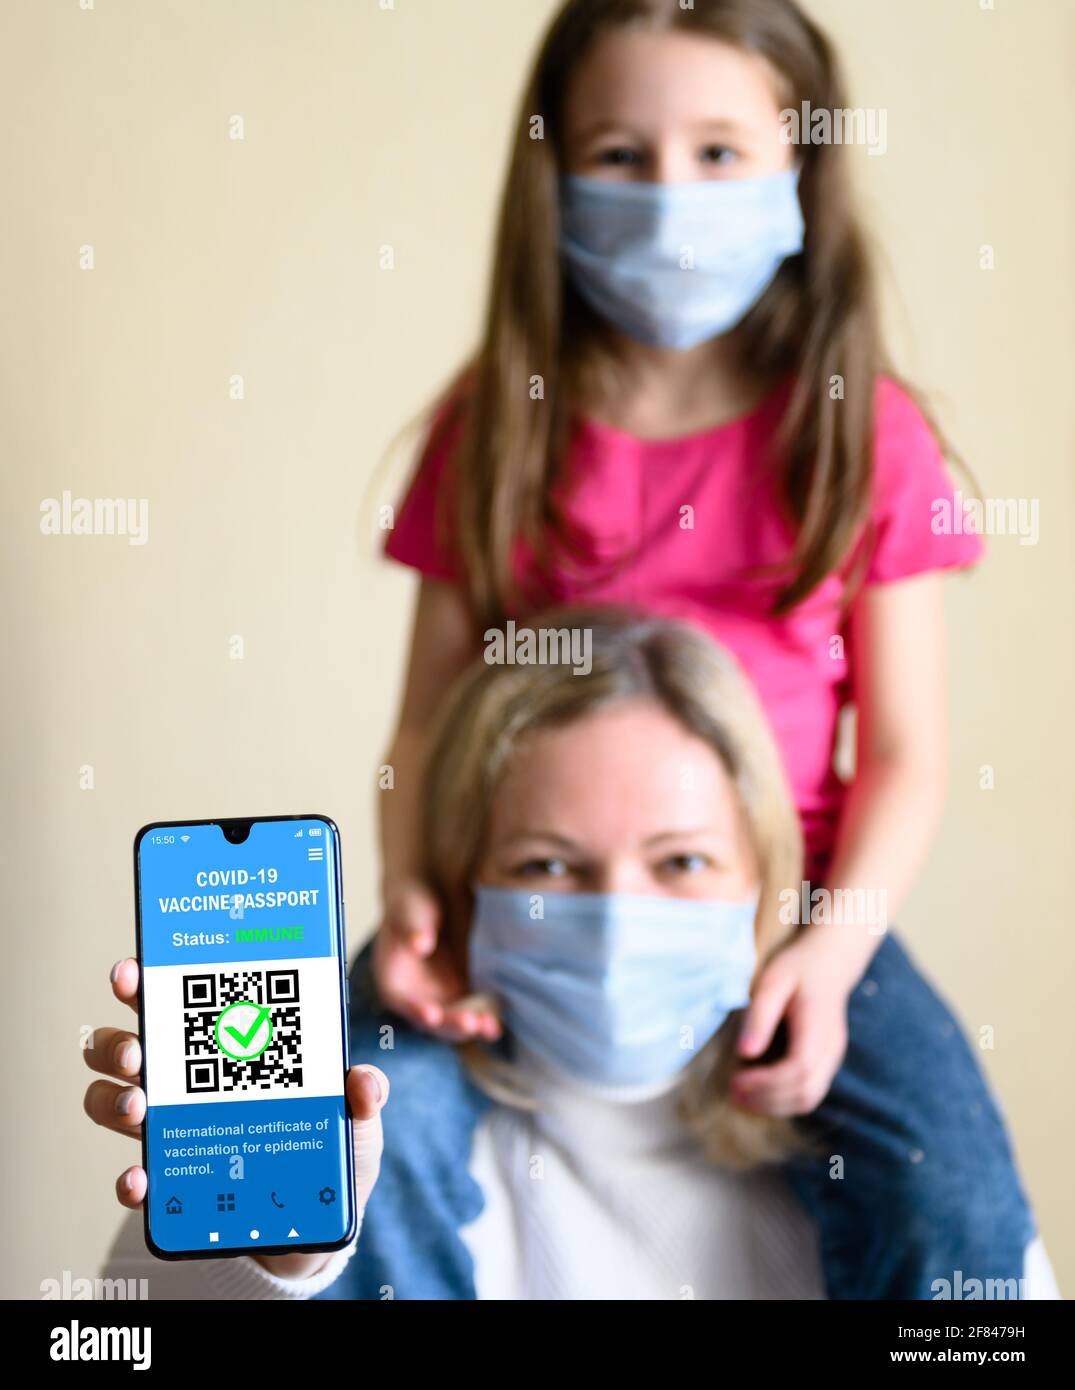 COVID-19 vaccination passport in mobile phone, happy woman with kid holds smartphone with health certificate app, digital coronavirus pass. Concept of Stock Photo